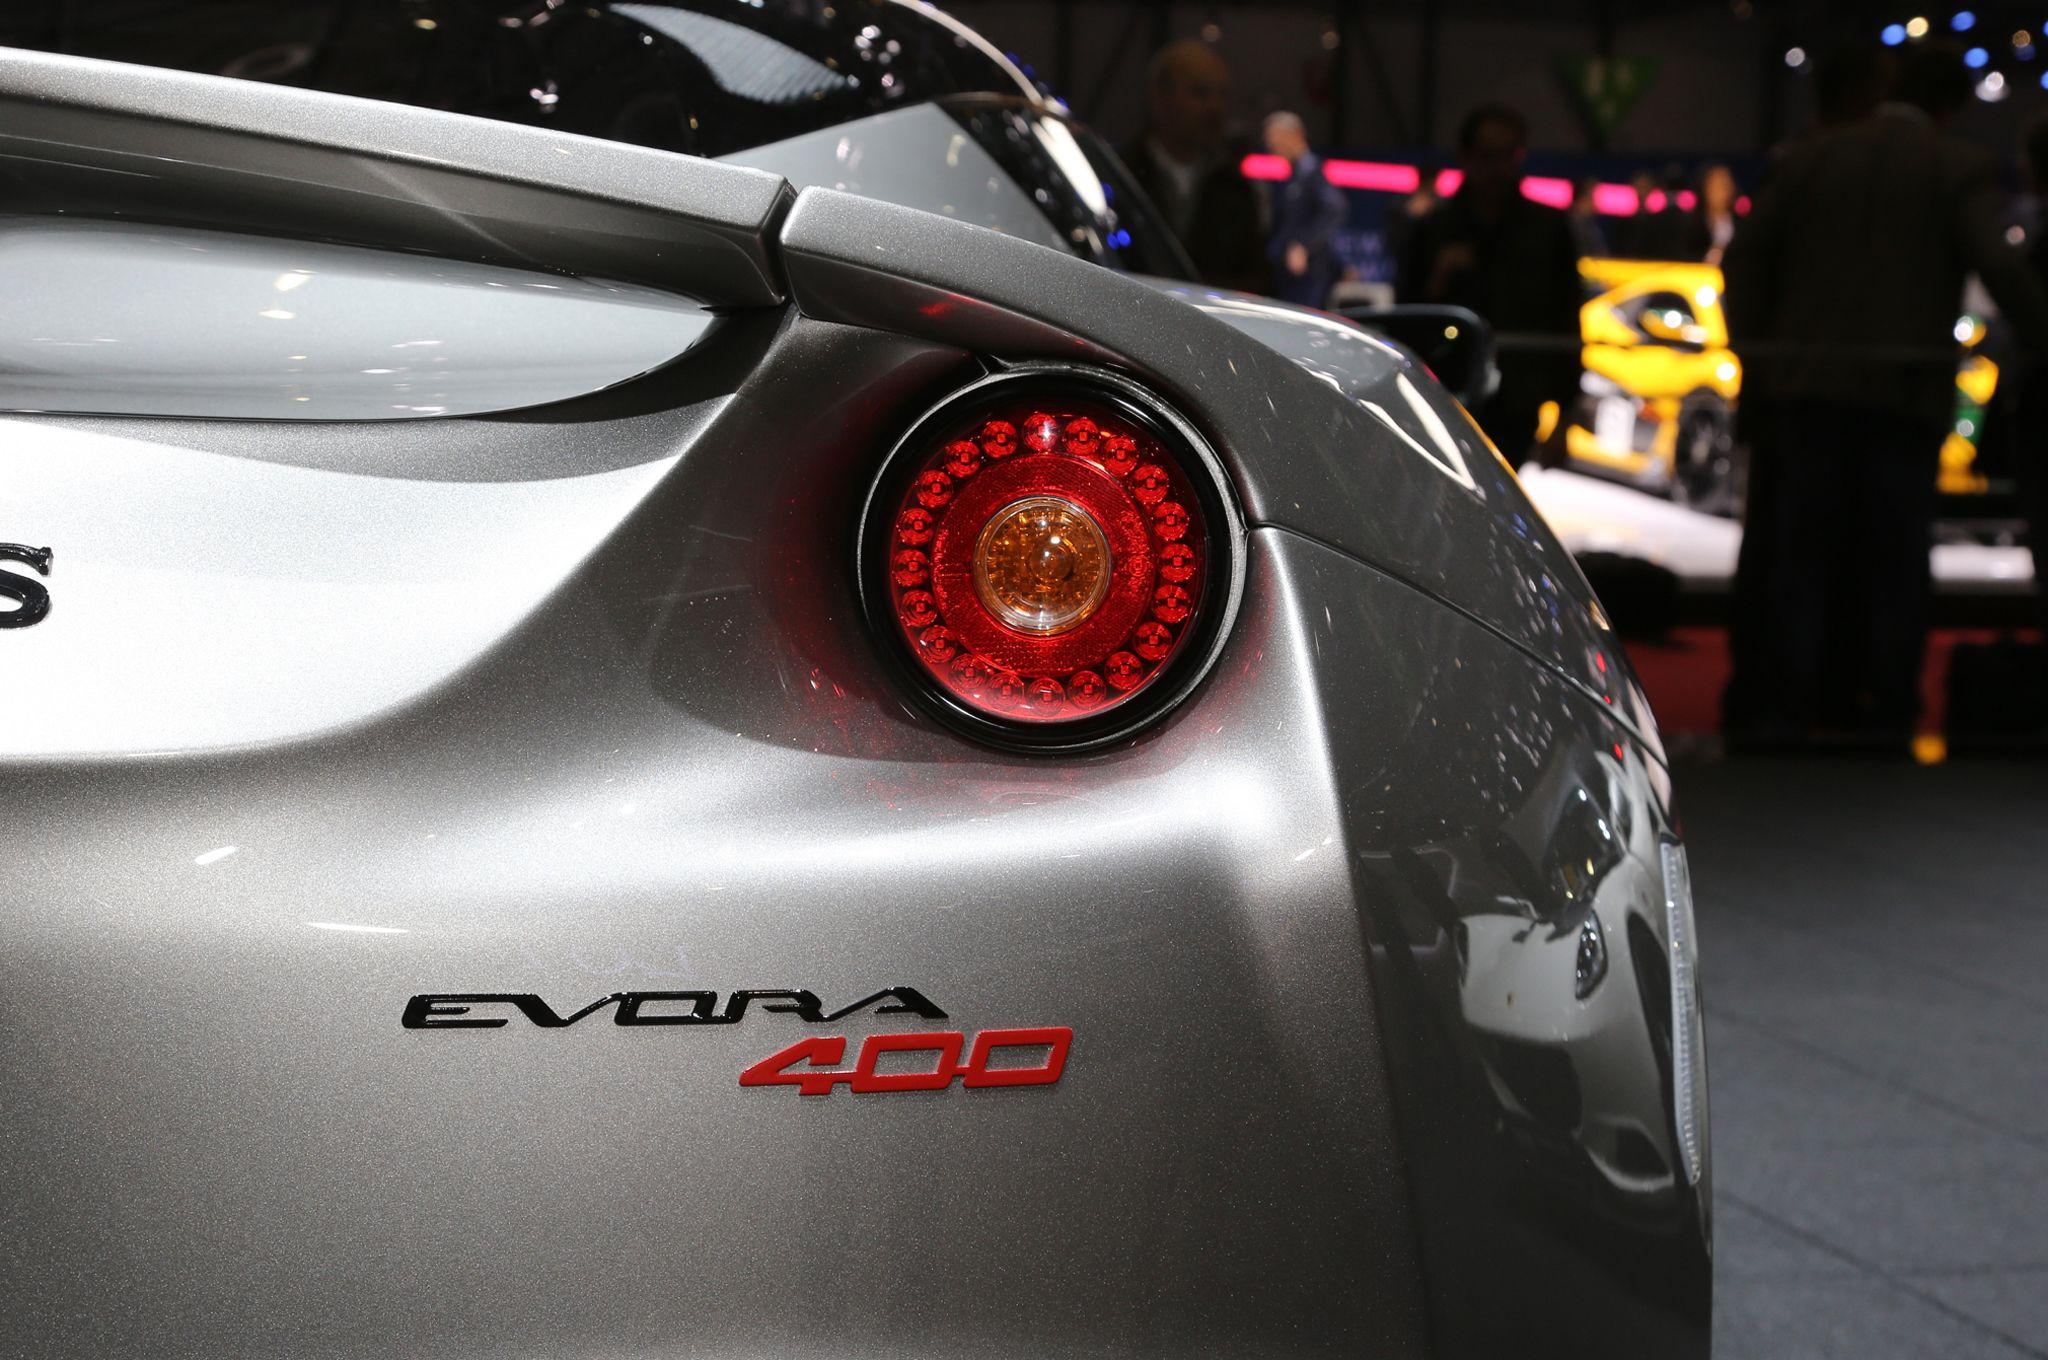 Lotus Evora 400 Roadster to Launch in Fall 2016